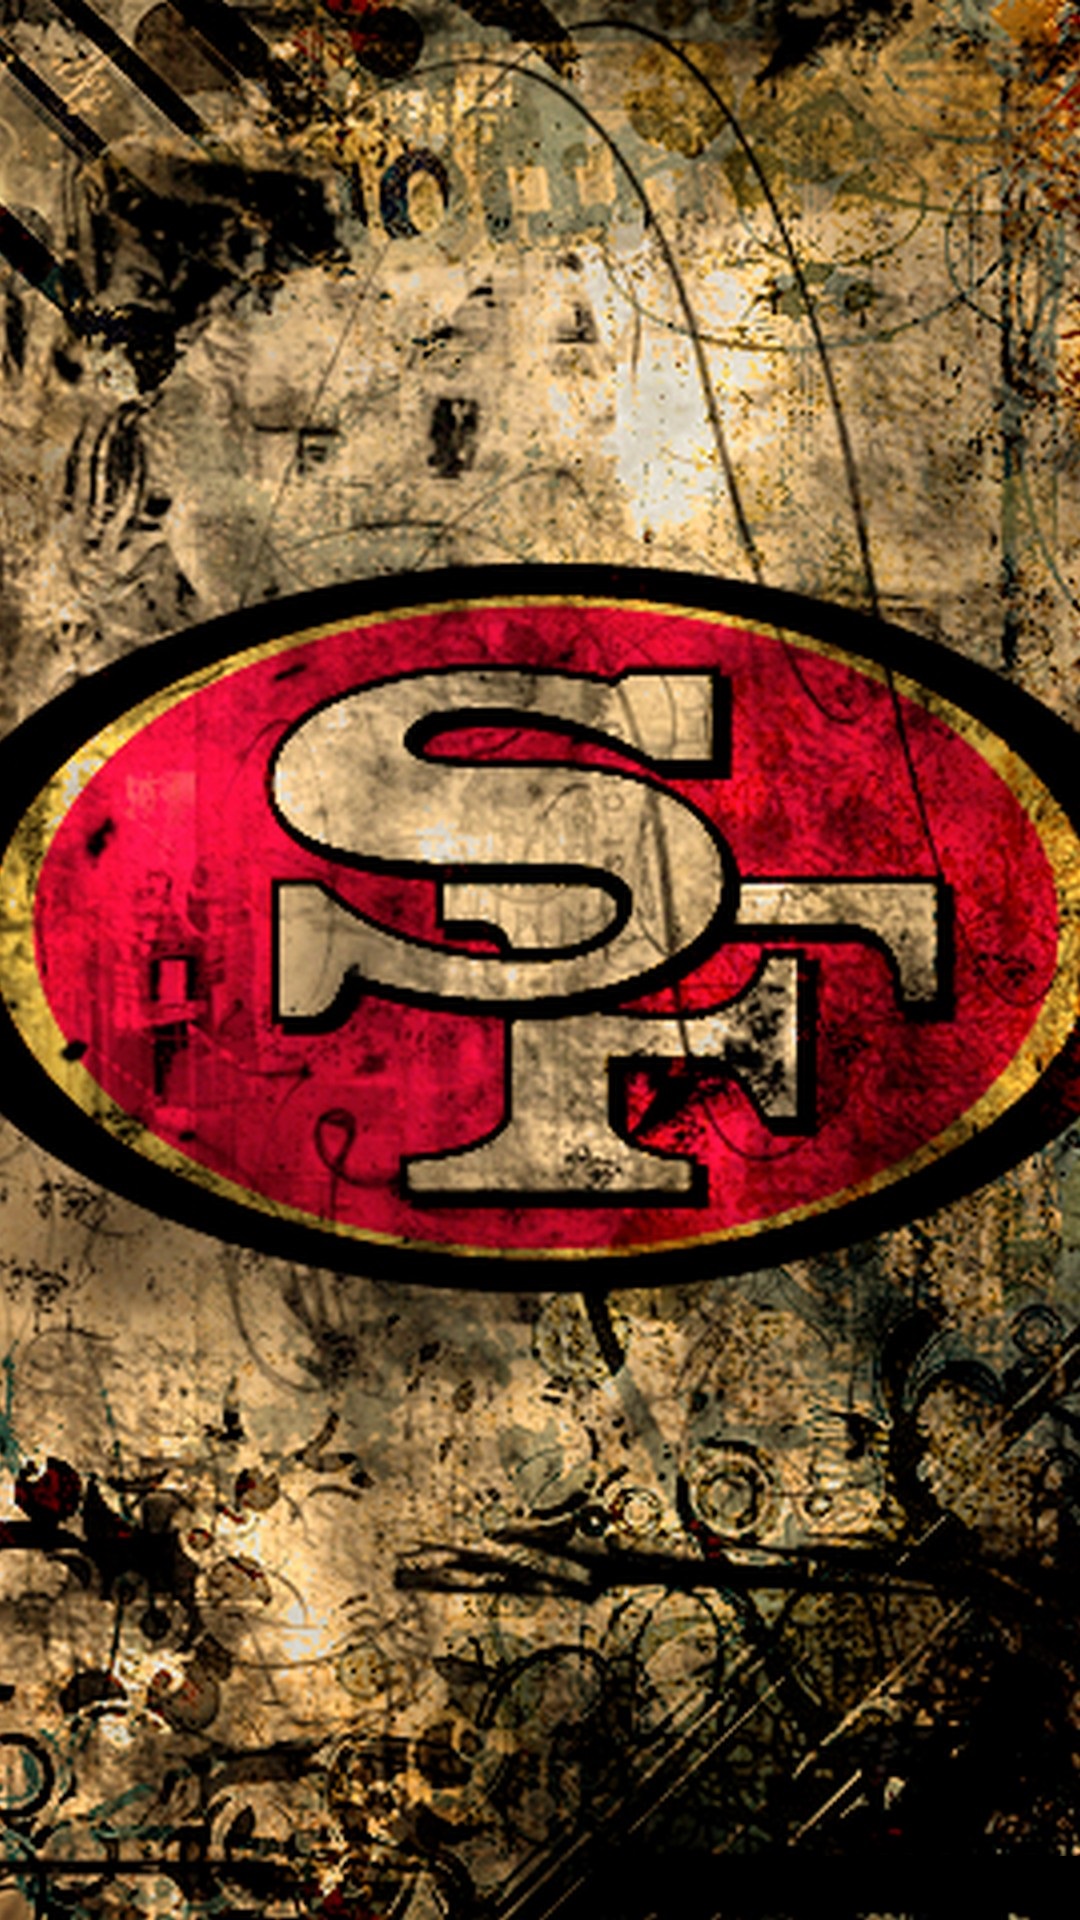 iPhone Wallpaper HD San Francisco 49ers with high-resolution 1080x1920 pixel. You can use this wallpaper for your iPhone 5, 6, 7, 8, X, XS, XR backgrounds, Mobile Screensaver, or iPad Lock Screen